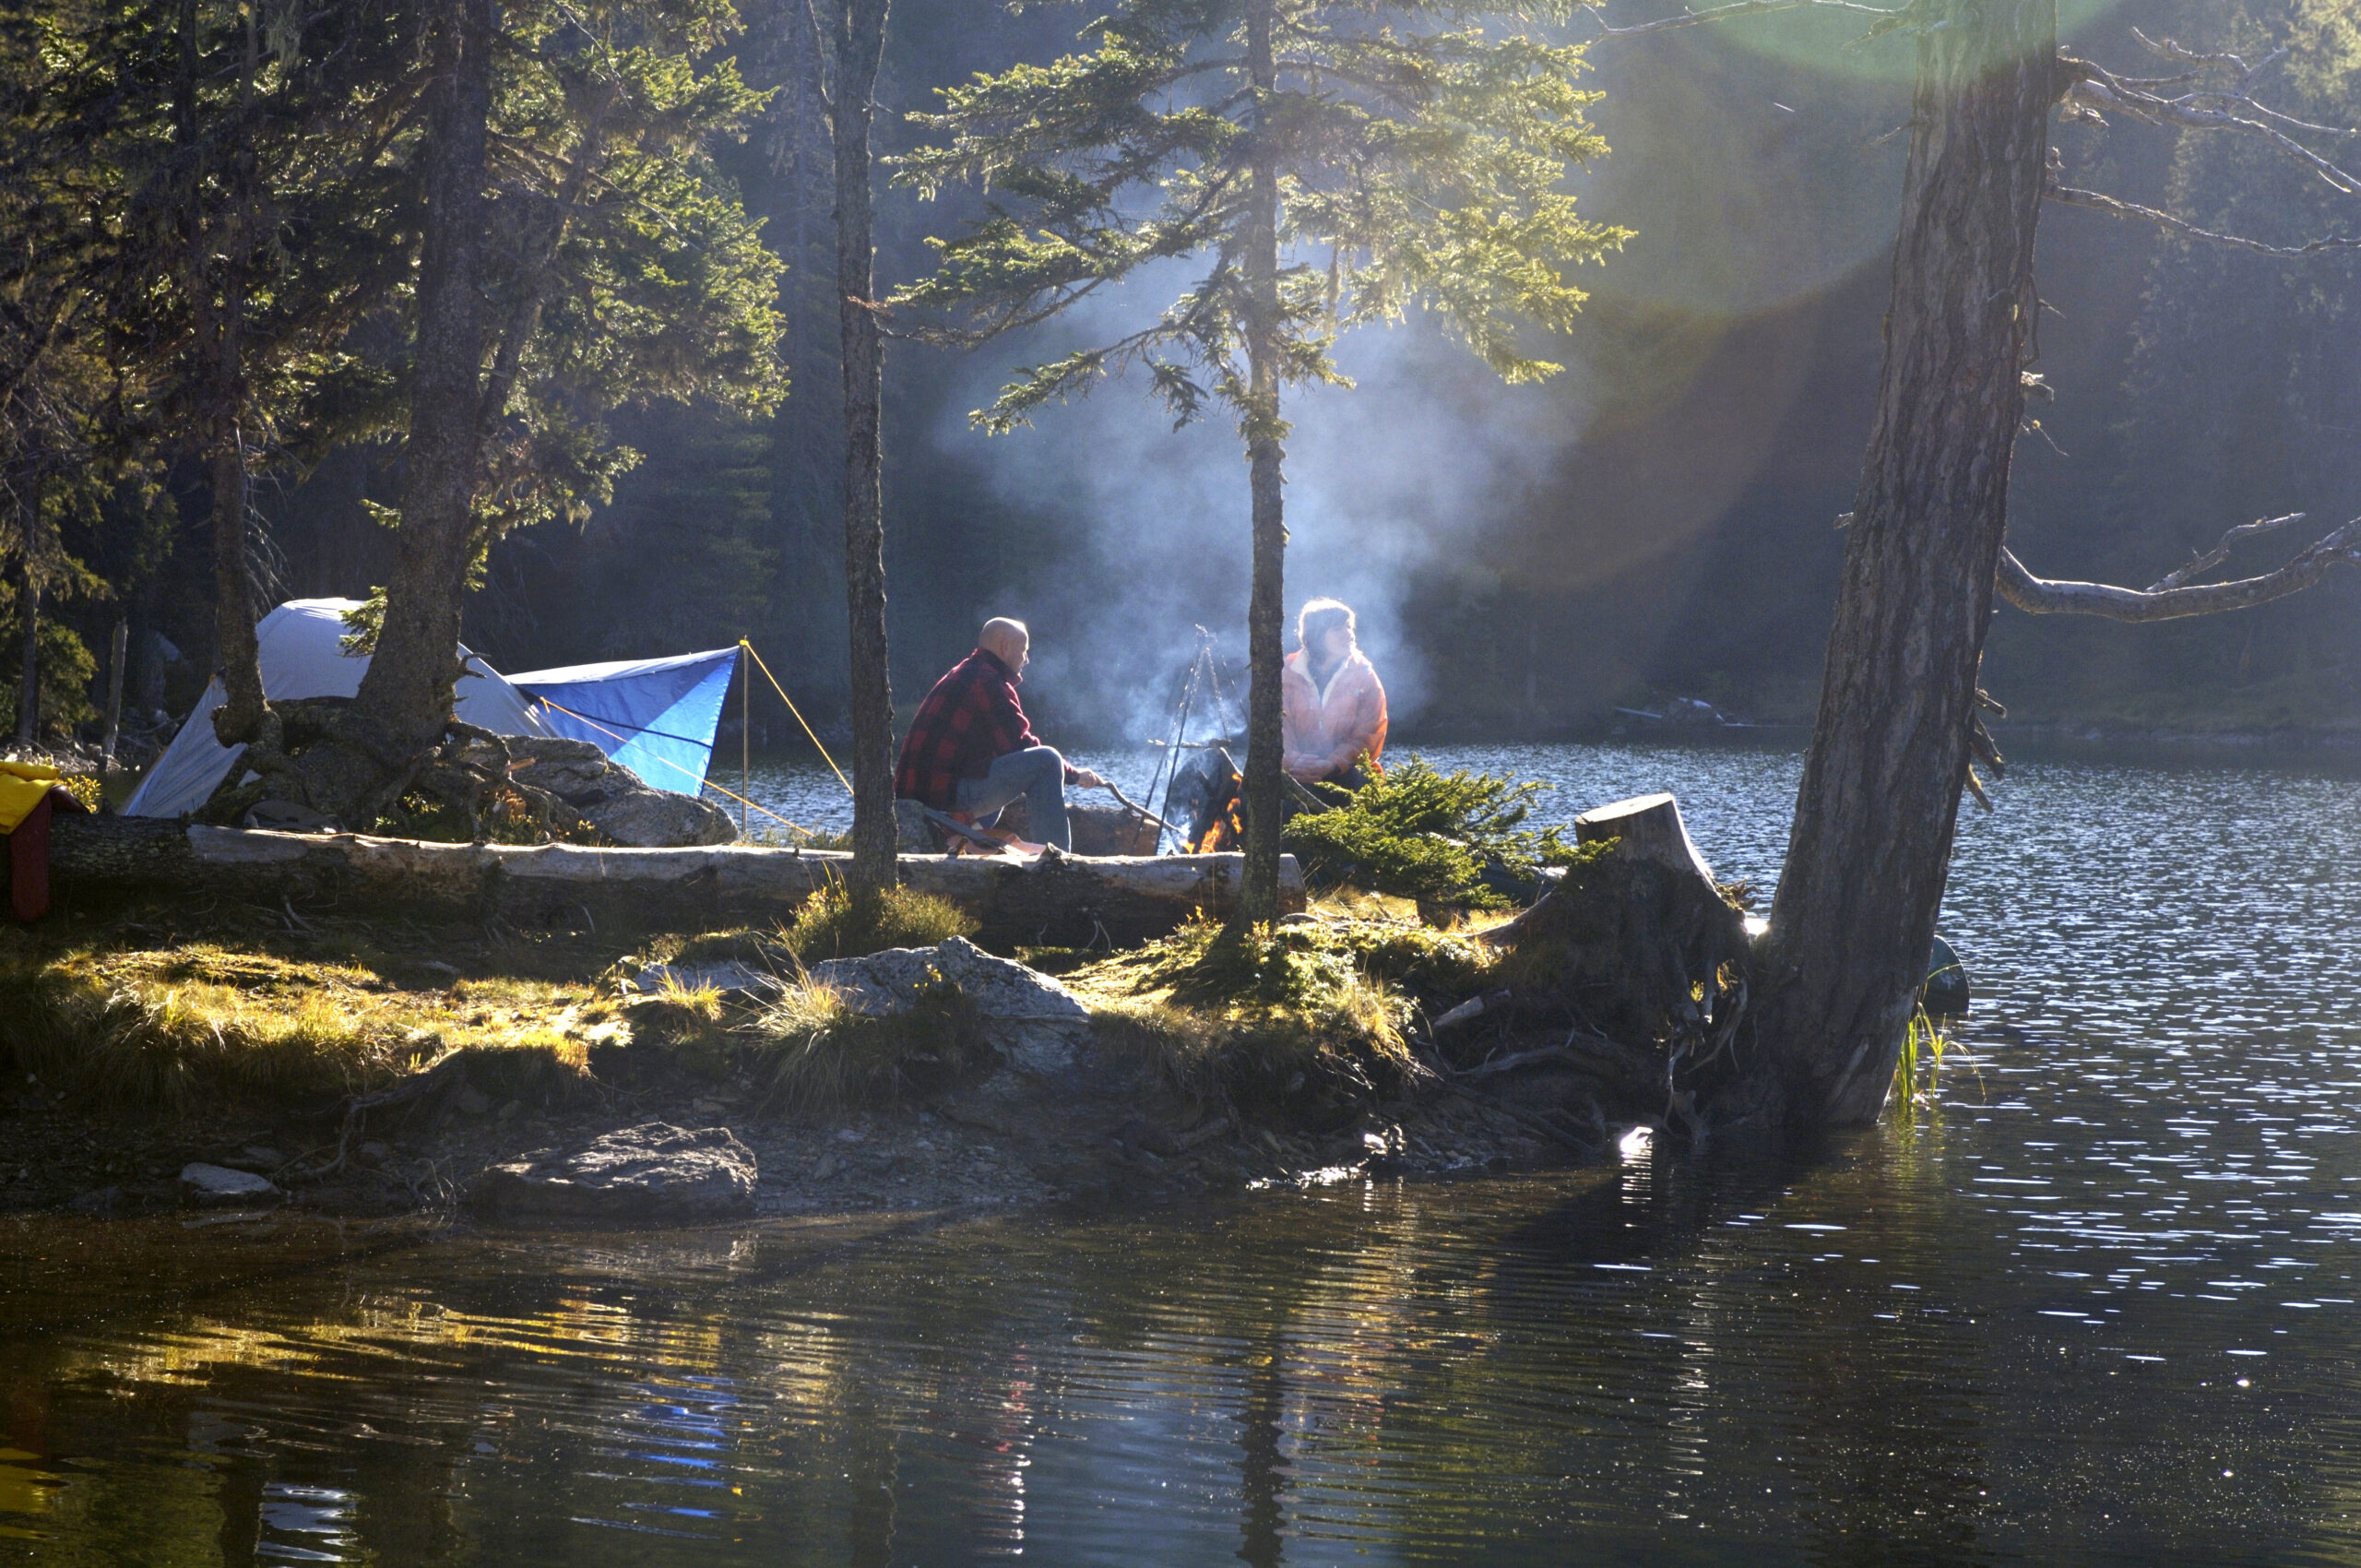 Man and woman camping on small island